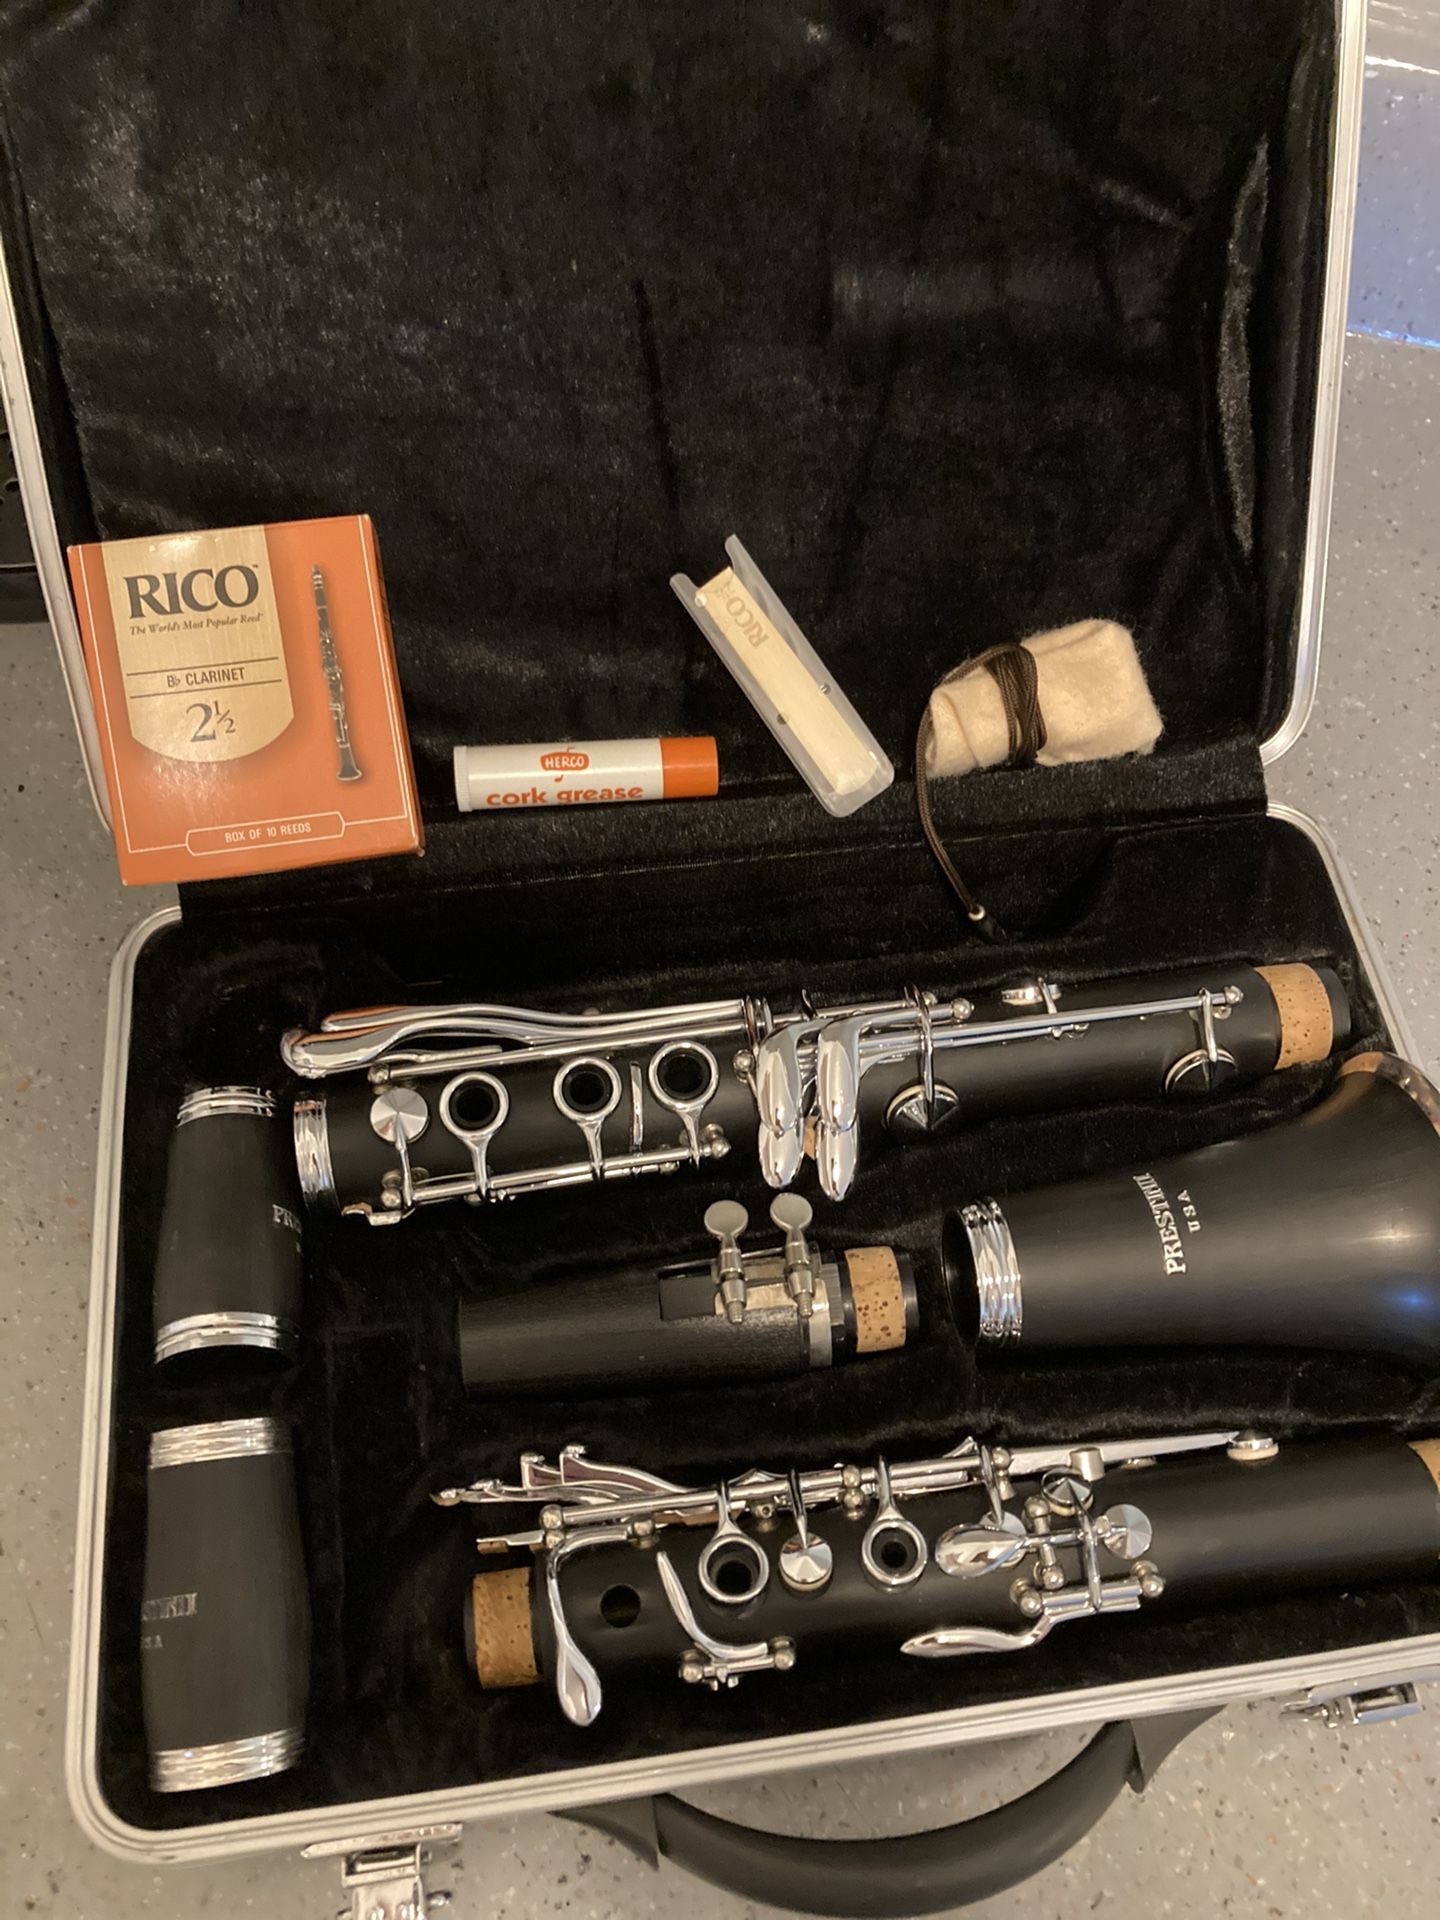 Clarinet in like new condition in a nice case. $65